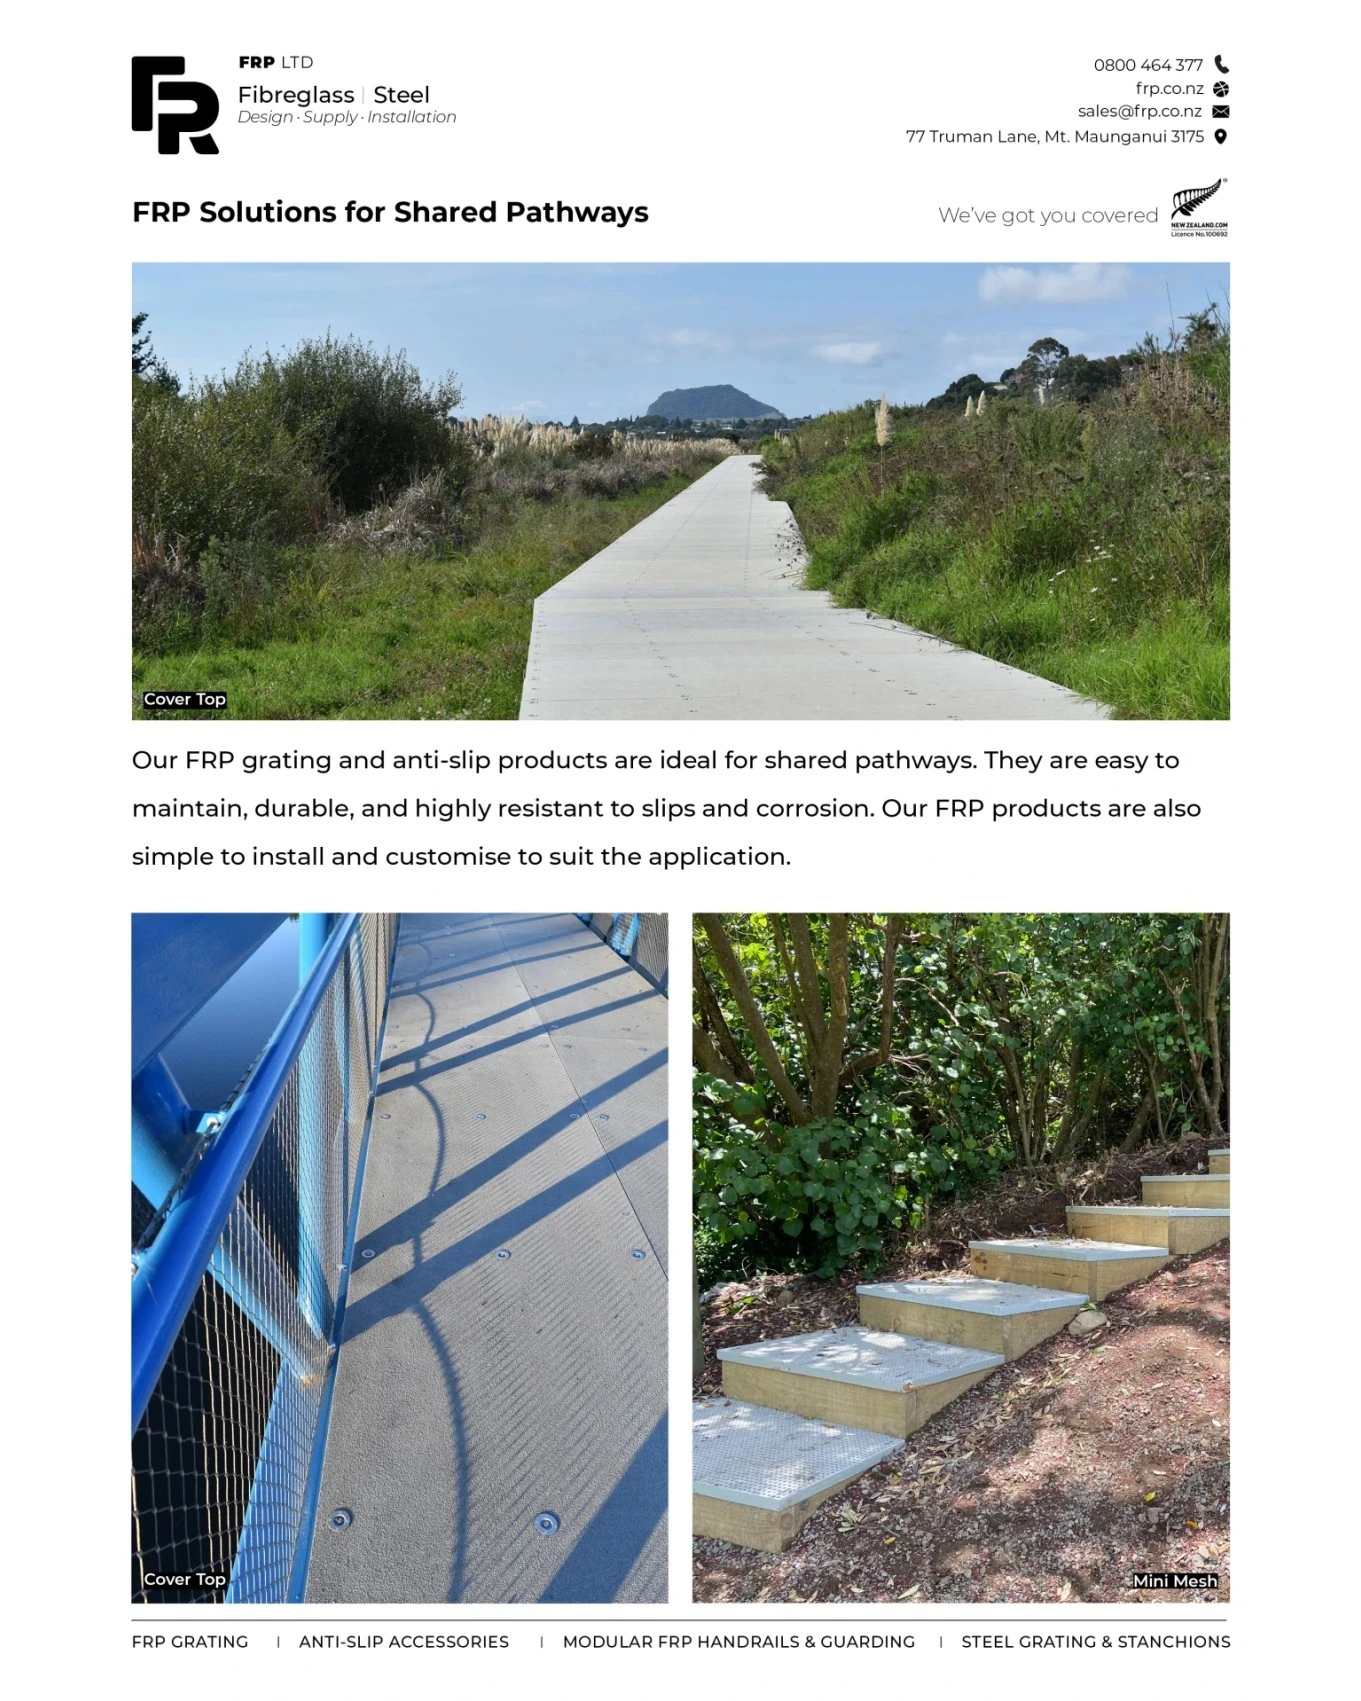 Call us to discuss your upcoming projects.

#frp #frpproducts #walkways #pathways #bridges #cycleways #publicspaces #nzarchitects #nzconstruction #commercial #marine